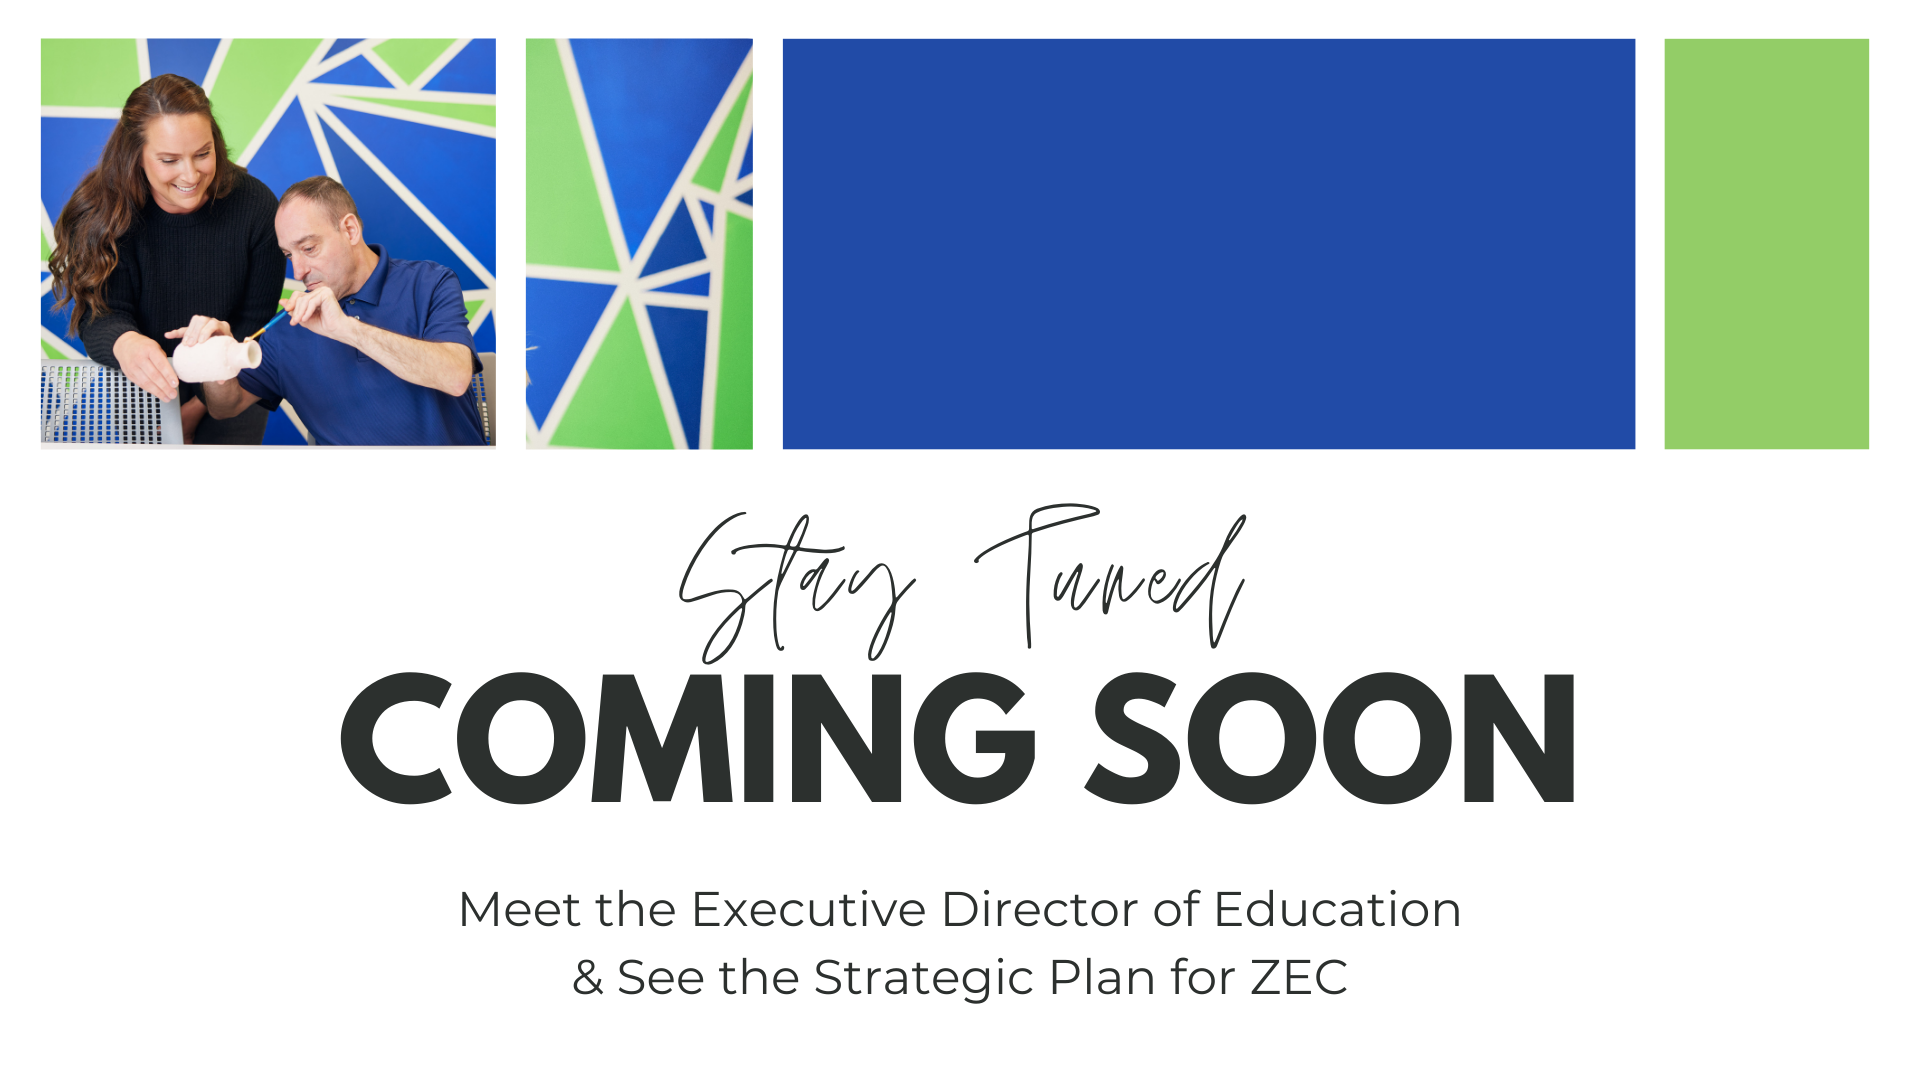 Meet the Executive Director of Education & See the Strategic Plan for ZEC